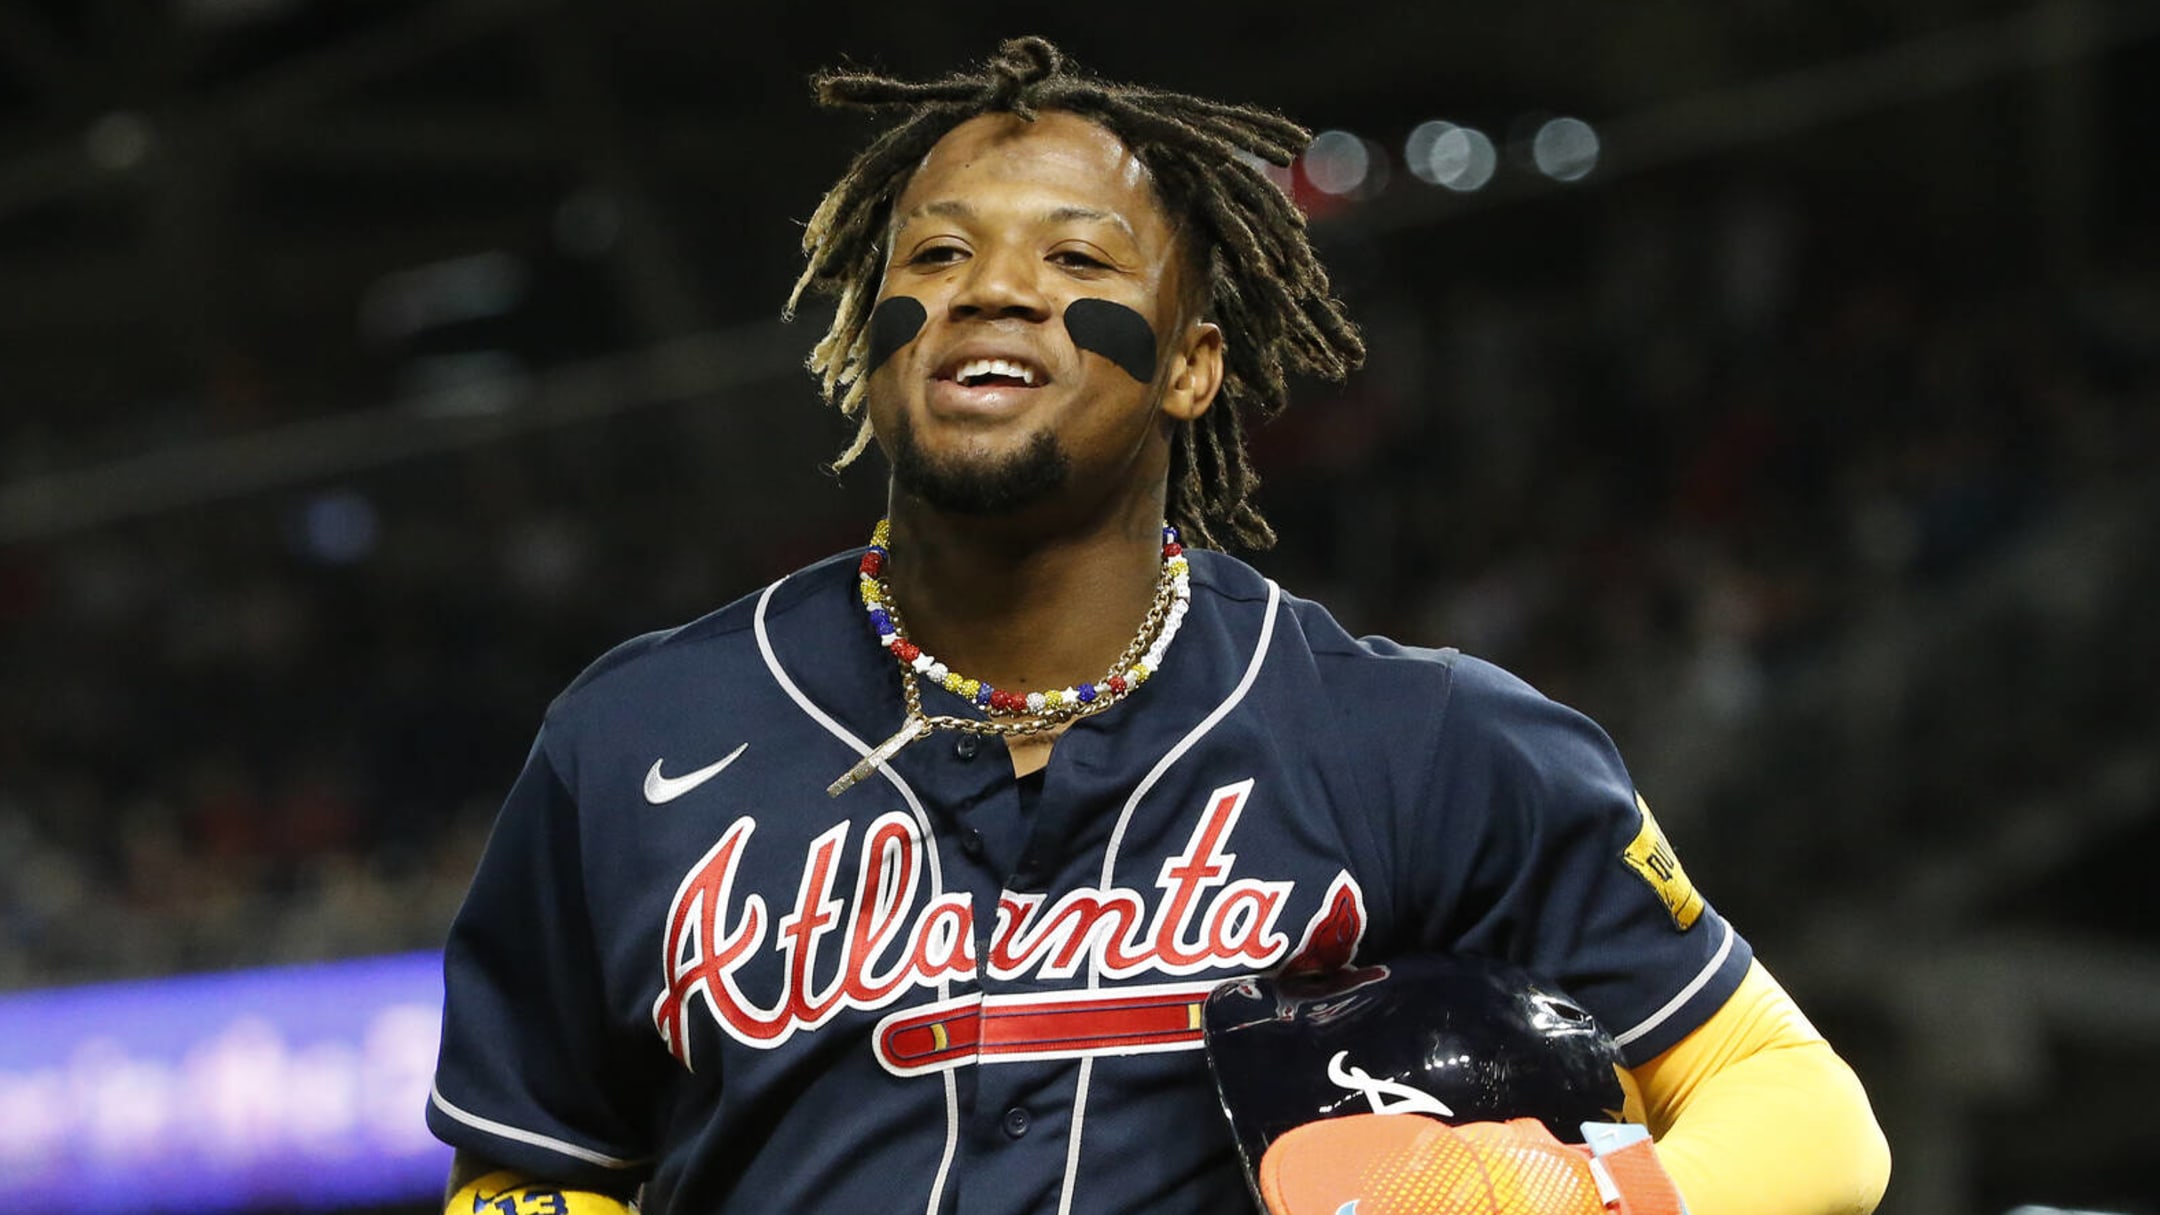 A historic season by a historic player. Ronald Acuña Jr. is doing